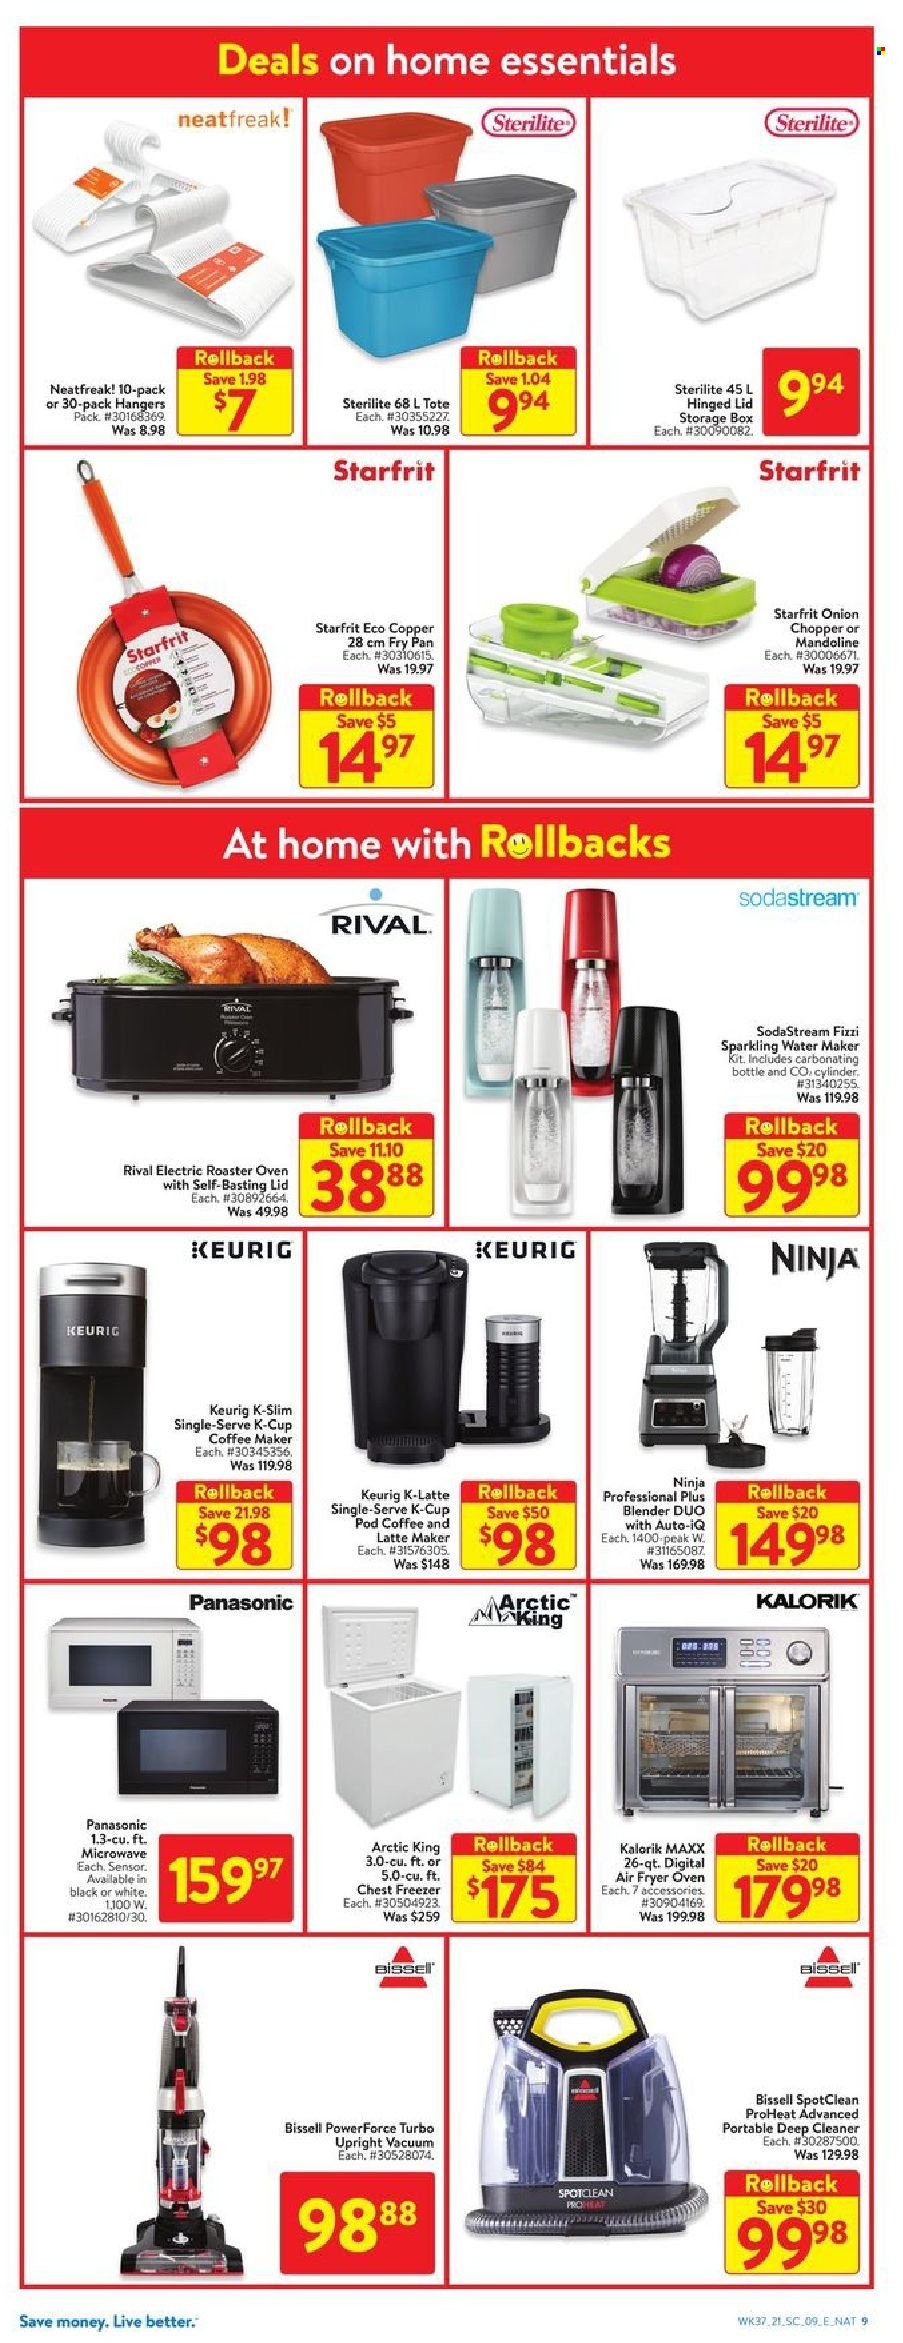 thumbnail - Walmart Flyer - October 07, 2021 - October 13, 2021 - Sales products - onion, coffee capsules, K-Cups, Keurig, cleaner, hanger, lid, pan, SodaStream, handy chopper, freezer, chest freezer, oven, microwave, coffee machine, Bissell, roaster, water maker, tote, blender, Panasonic. Page 19.